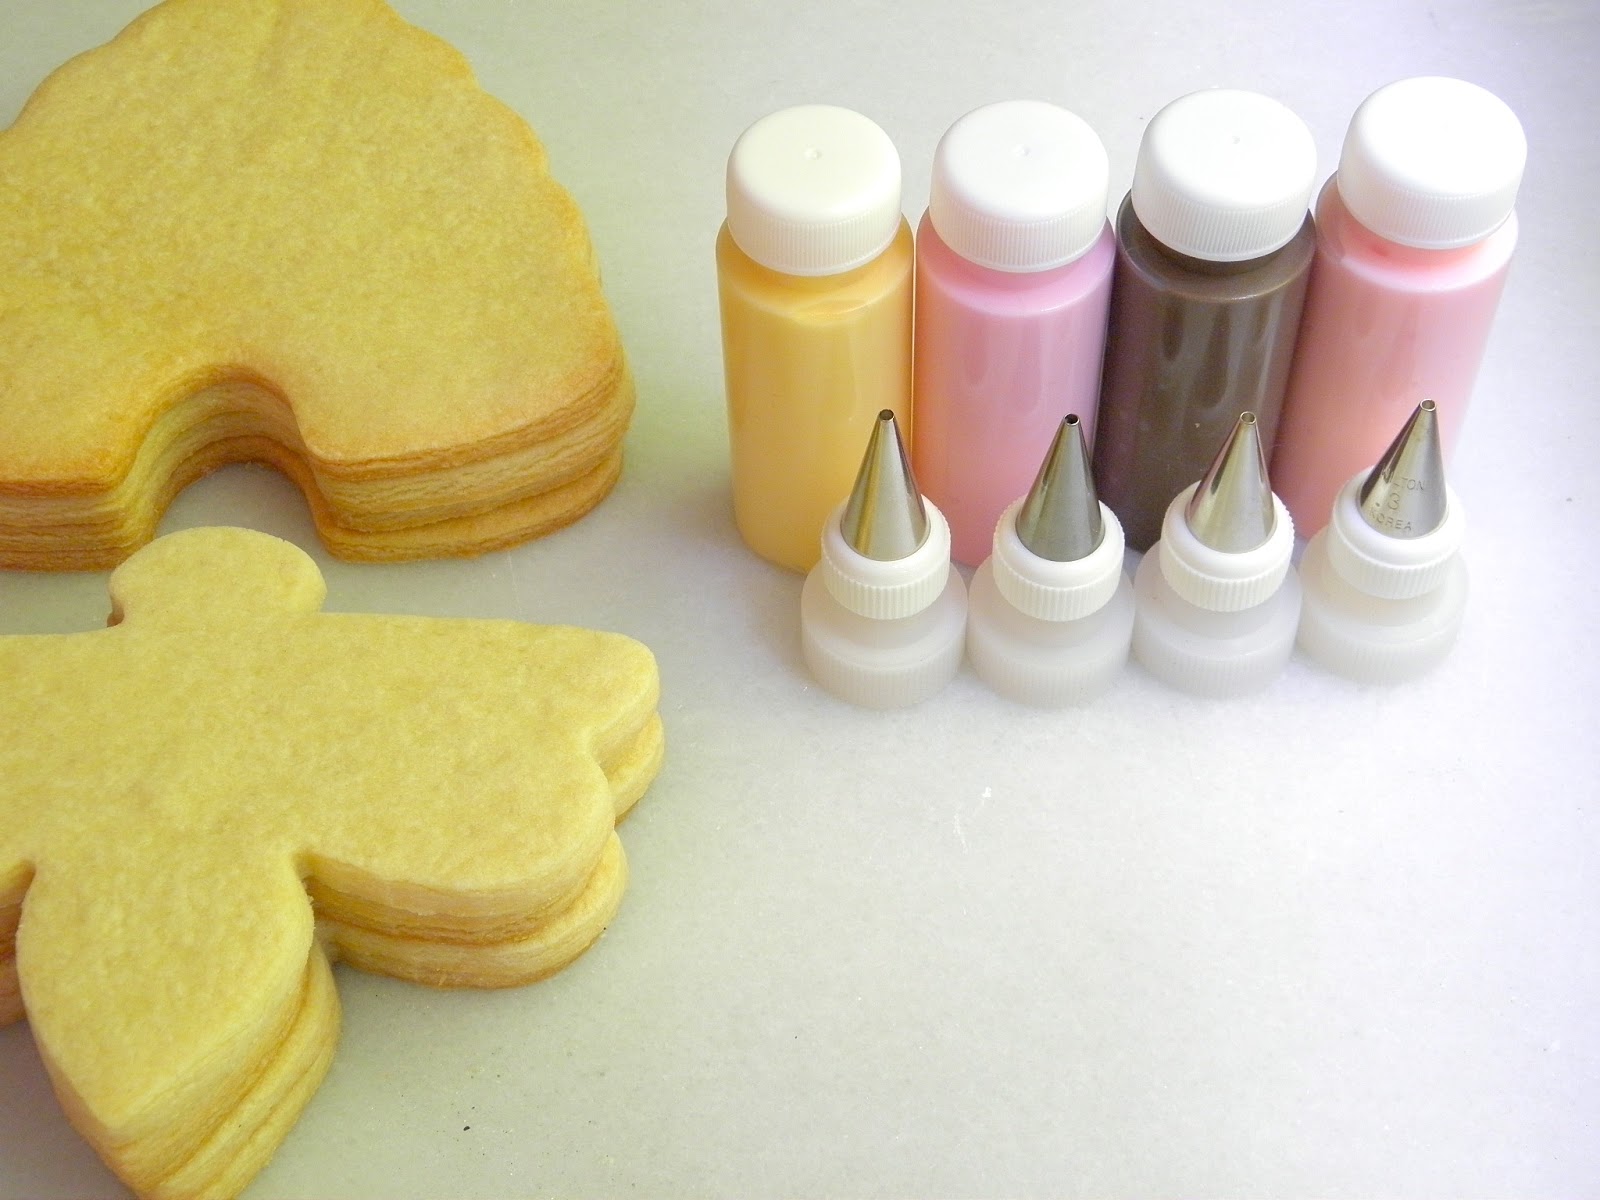  Royal Icing Squeeze Bottles